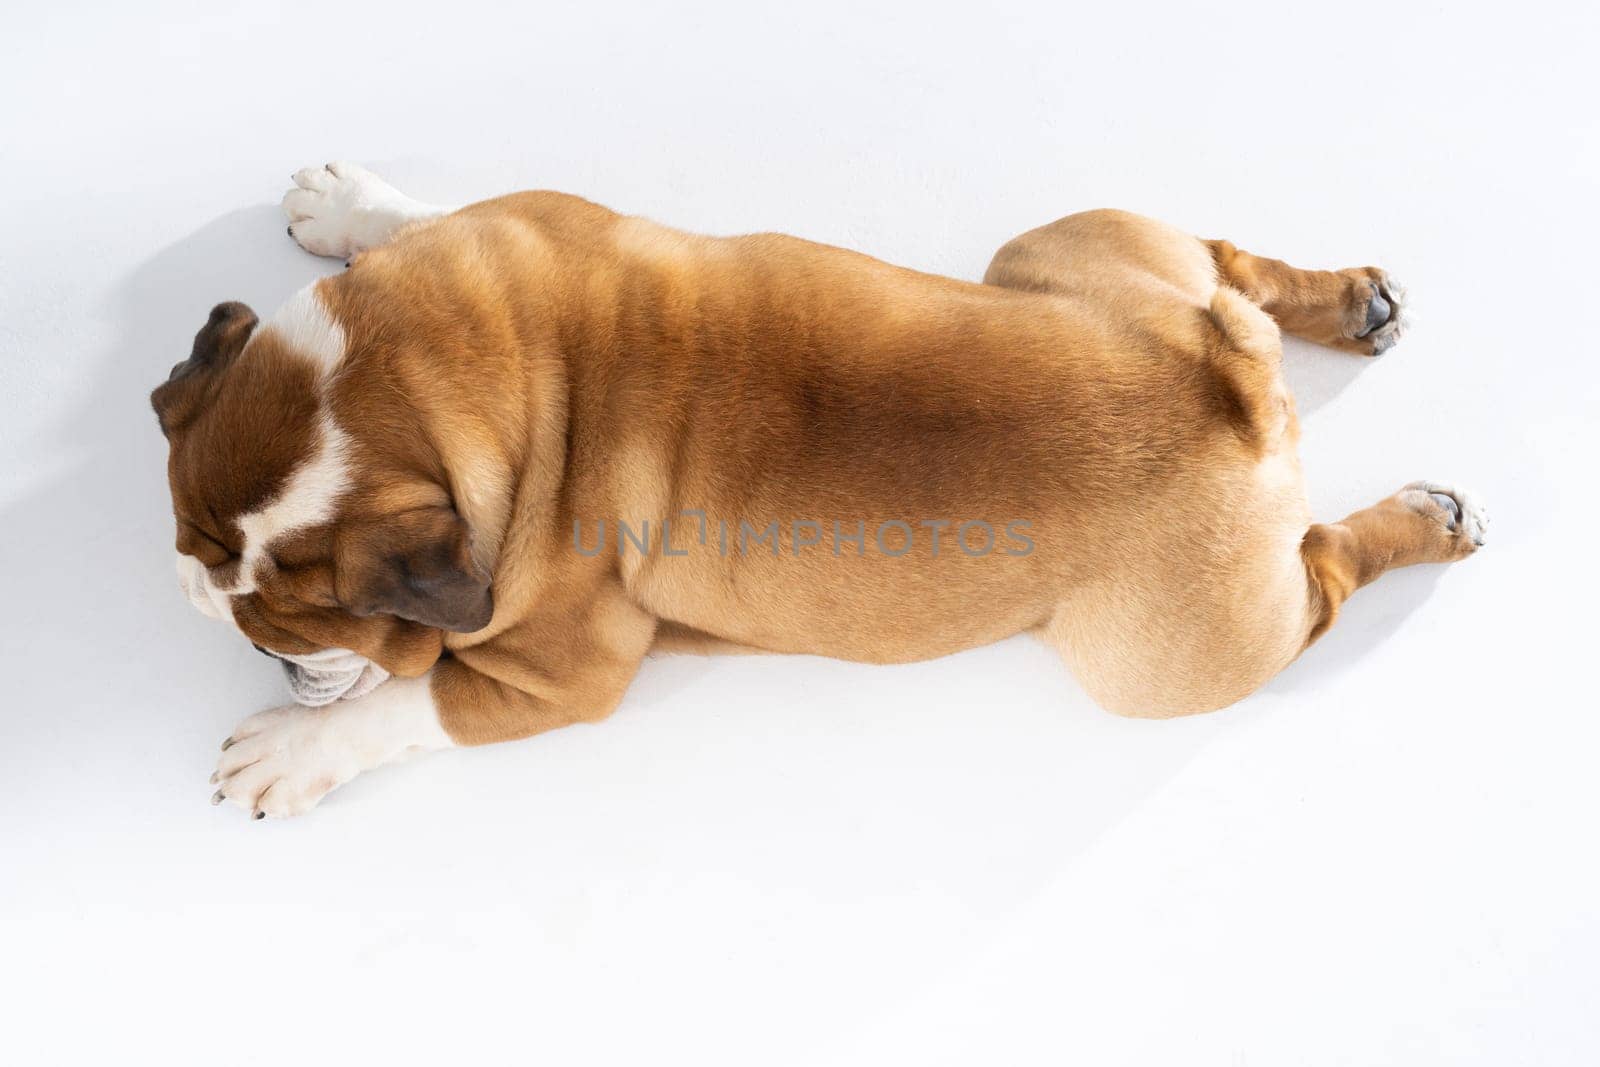 While resting, the dog licks its paws. The English Bulldog was bred as a companion and deterrent dog. A breed with a brown coat with white patches.